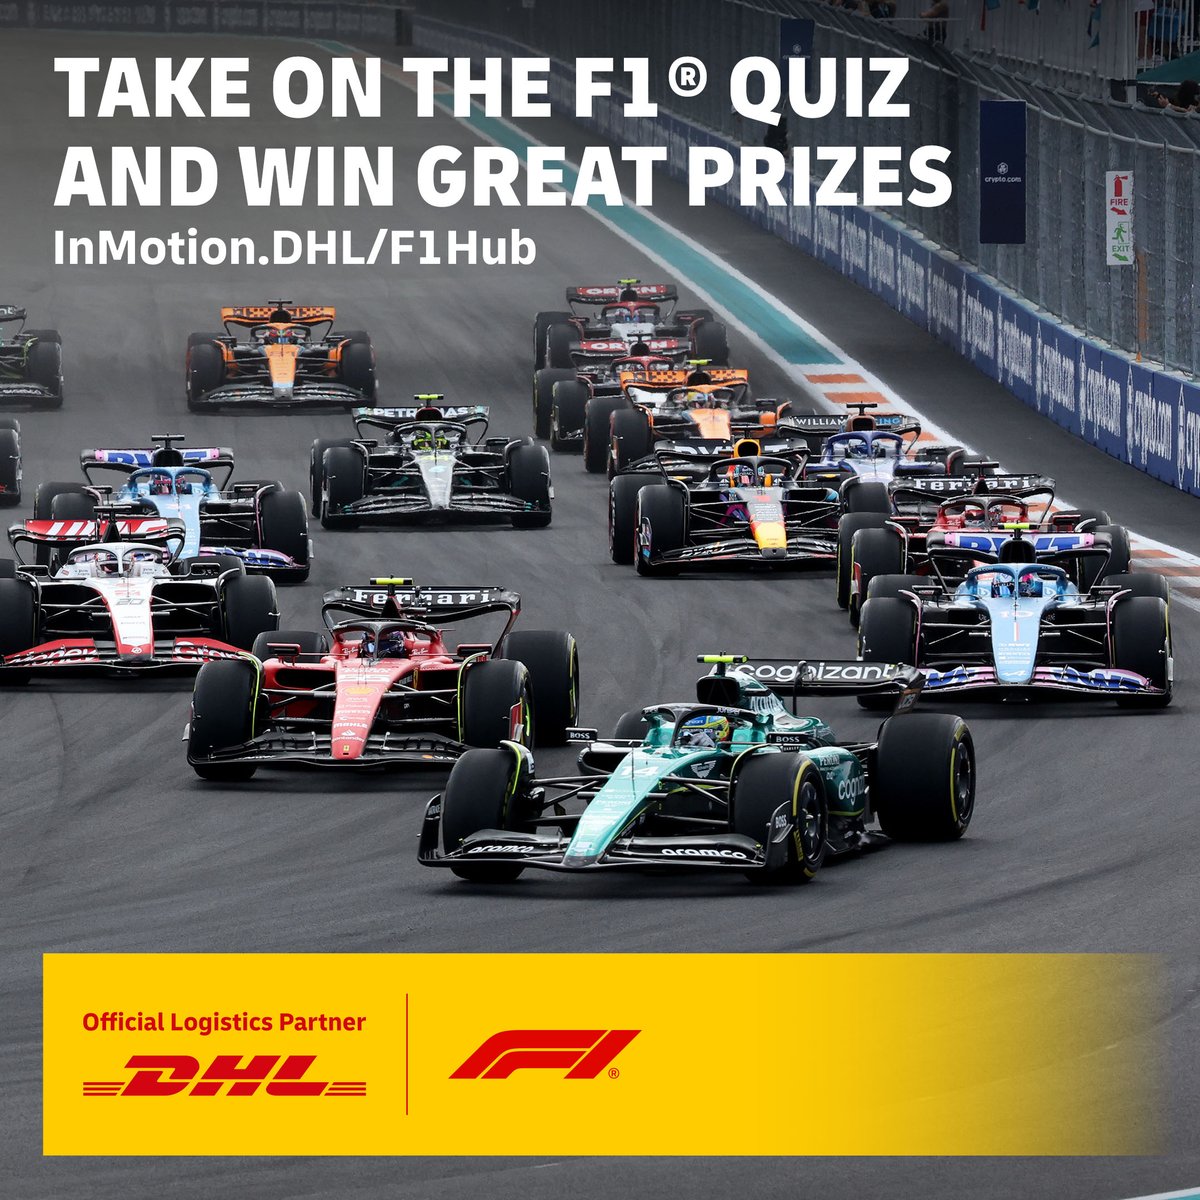 How much do you know about the #MiamiGP? 🇺🇸 Test your knowledge in our #F1 quiz and win amazing prizes. Enter here: InMotion.DHL/F1Hub